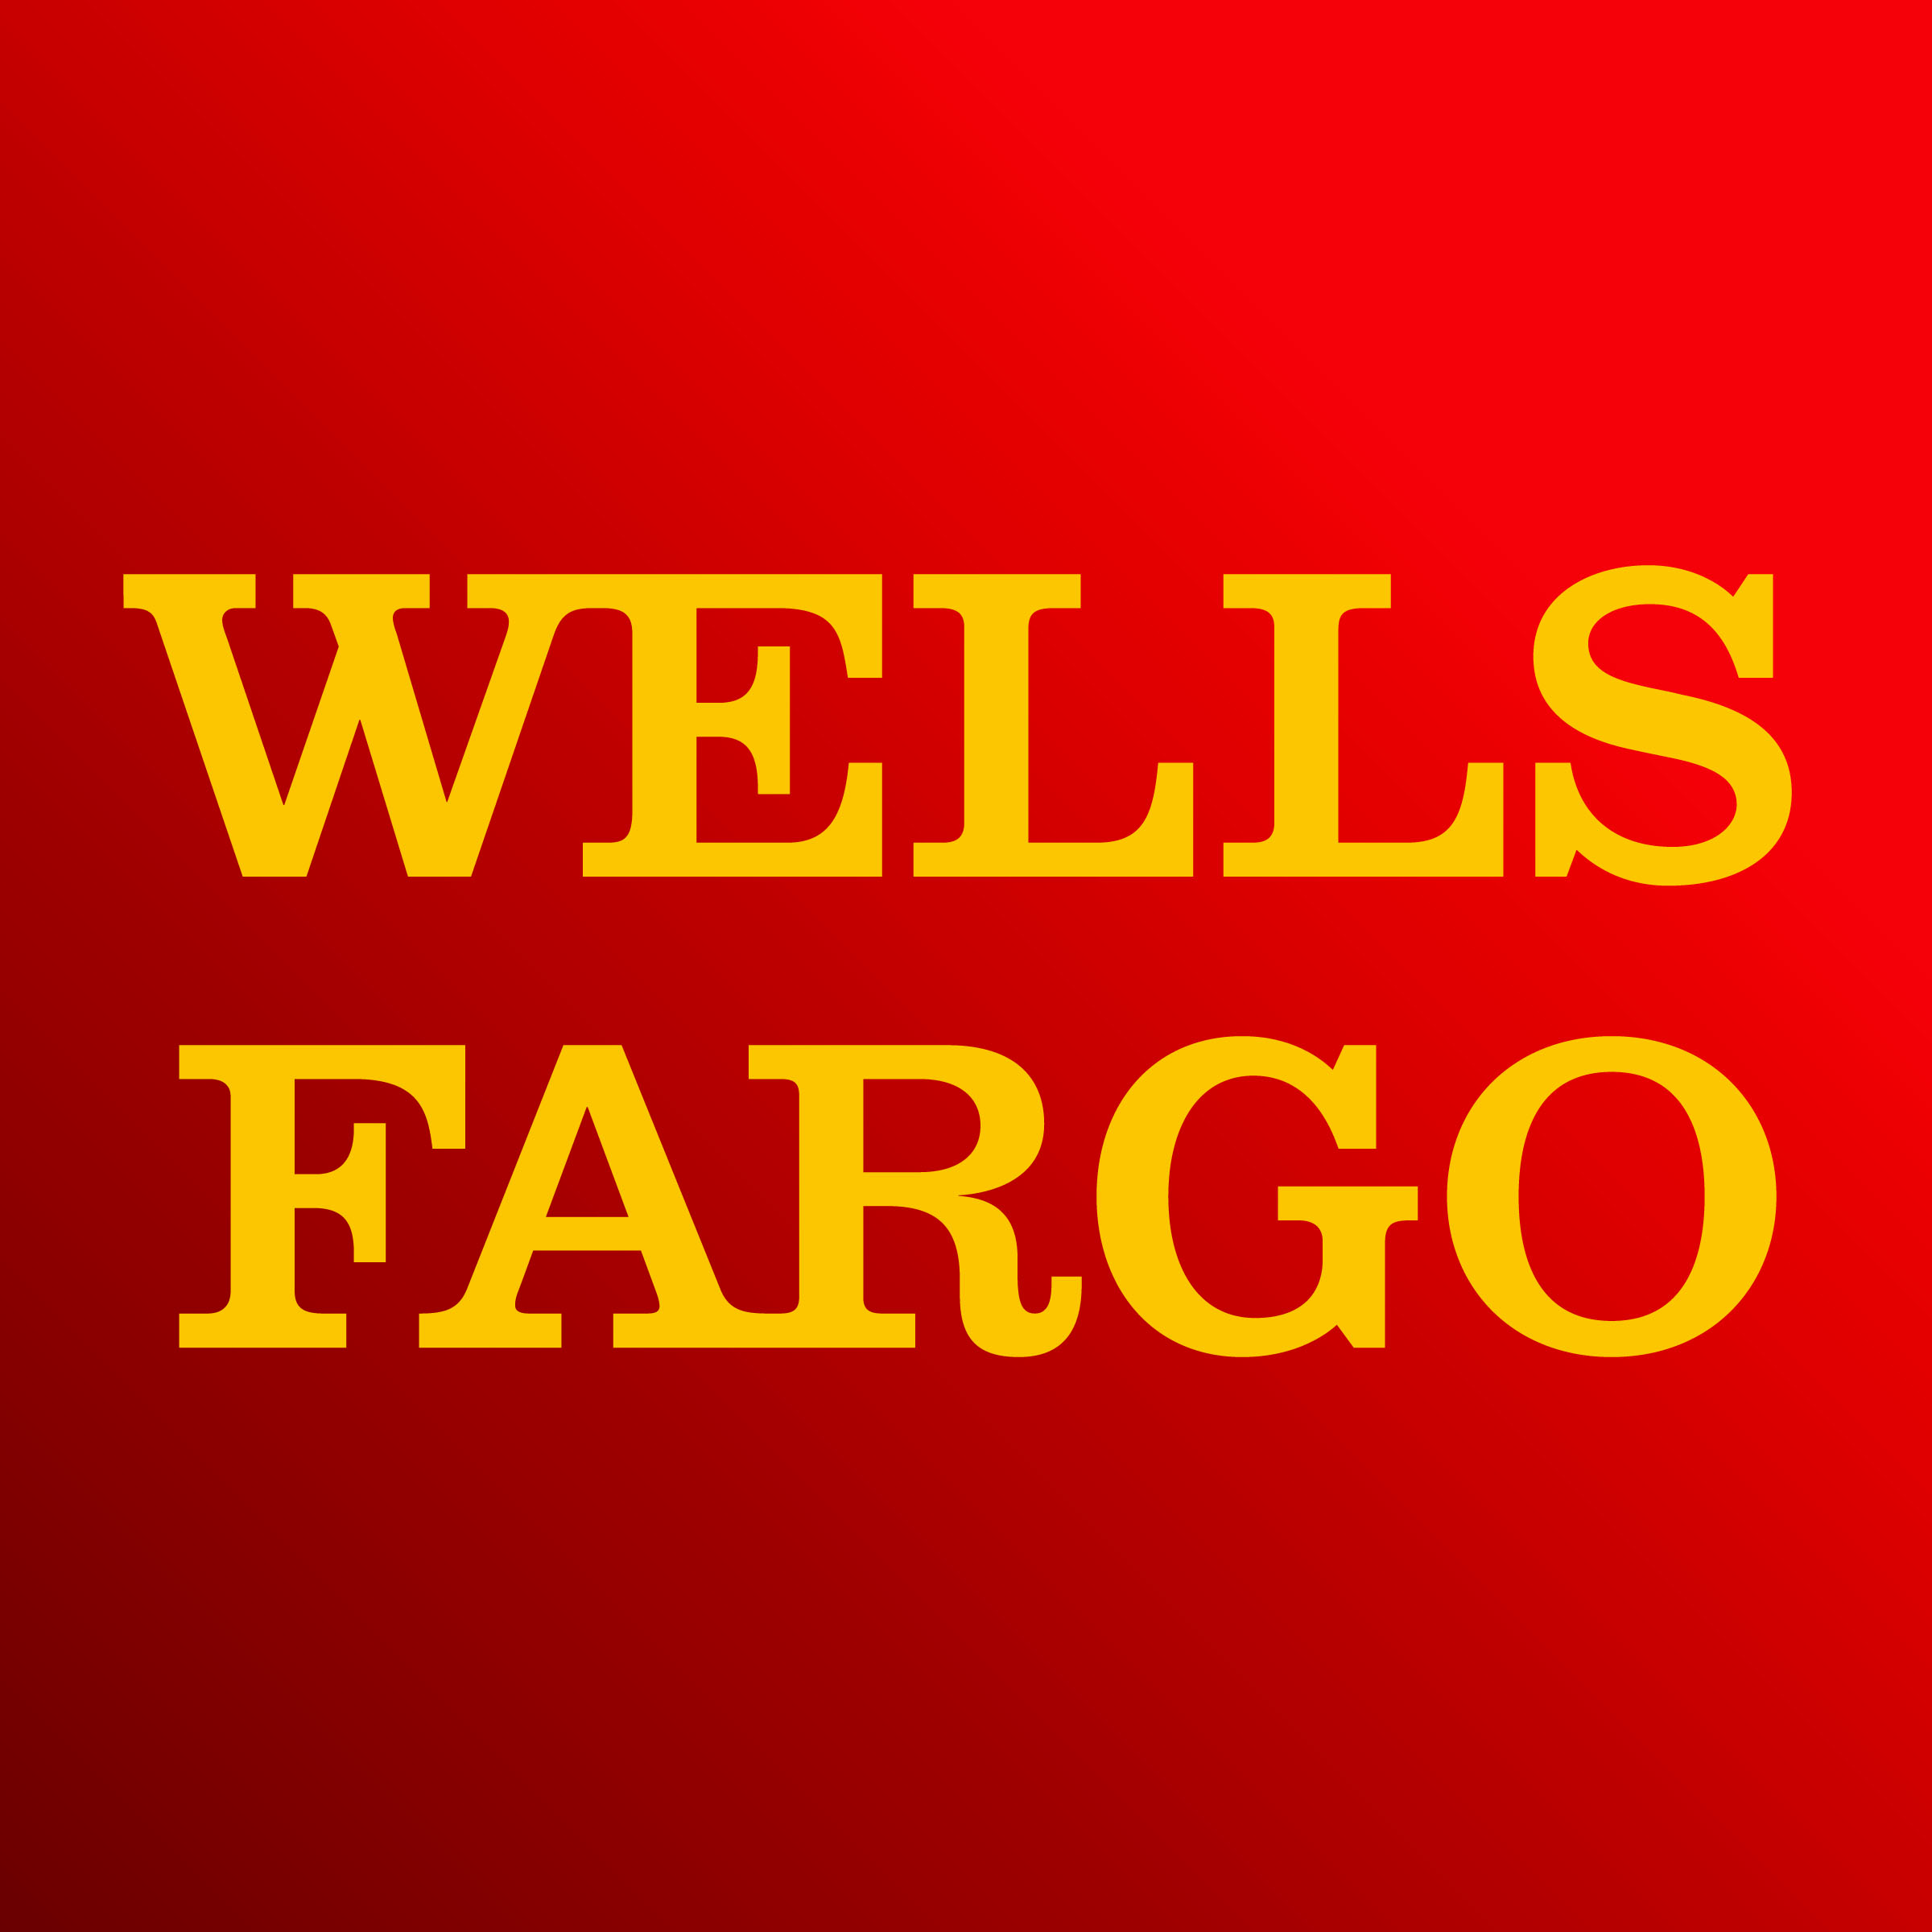 Red Square with Wells Fargo yellow logo